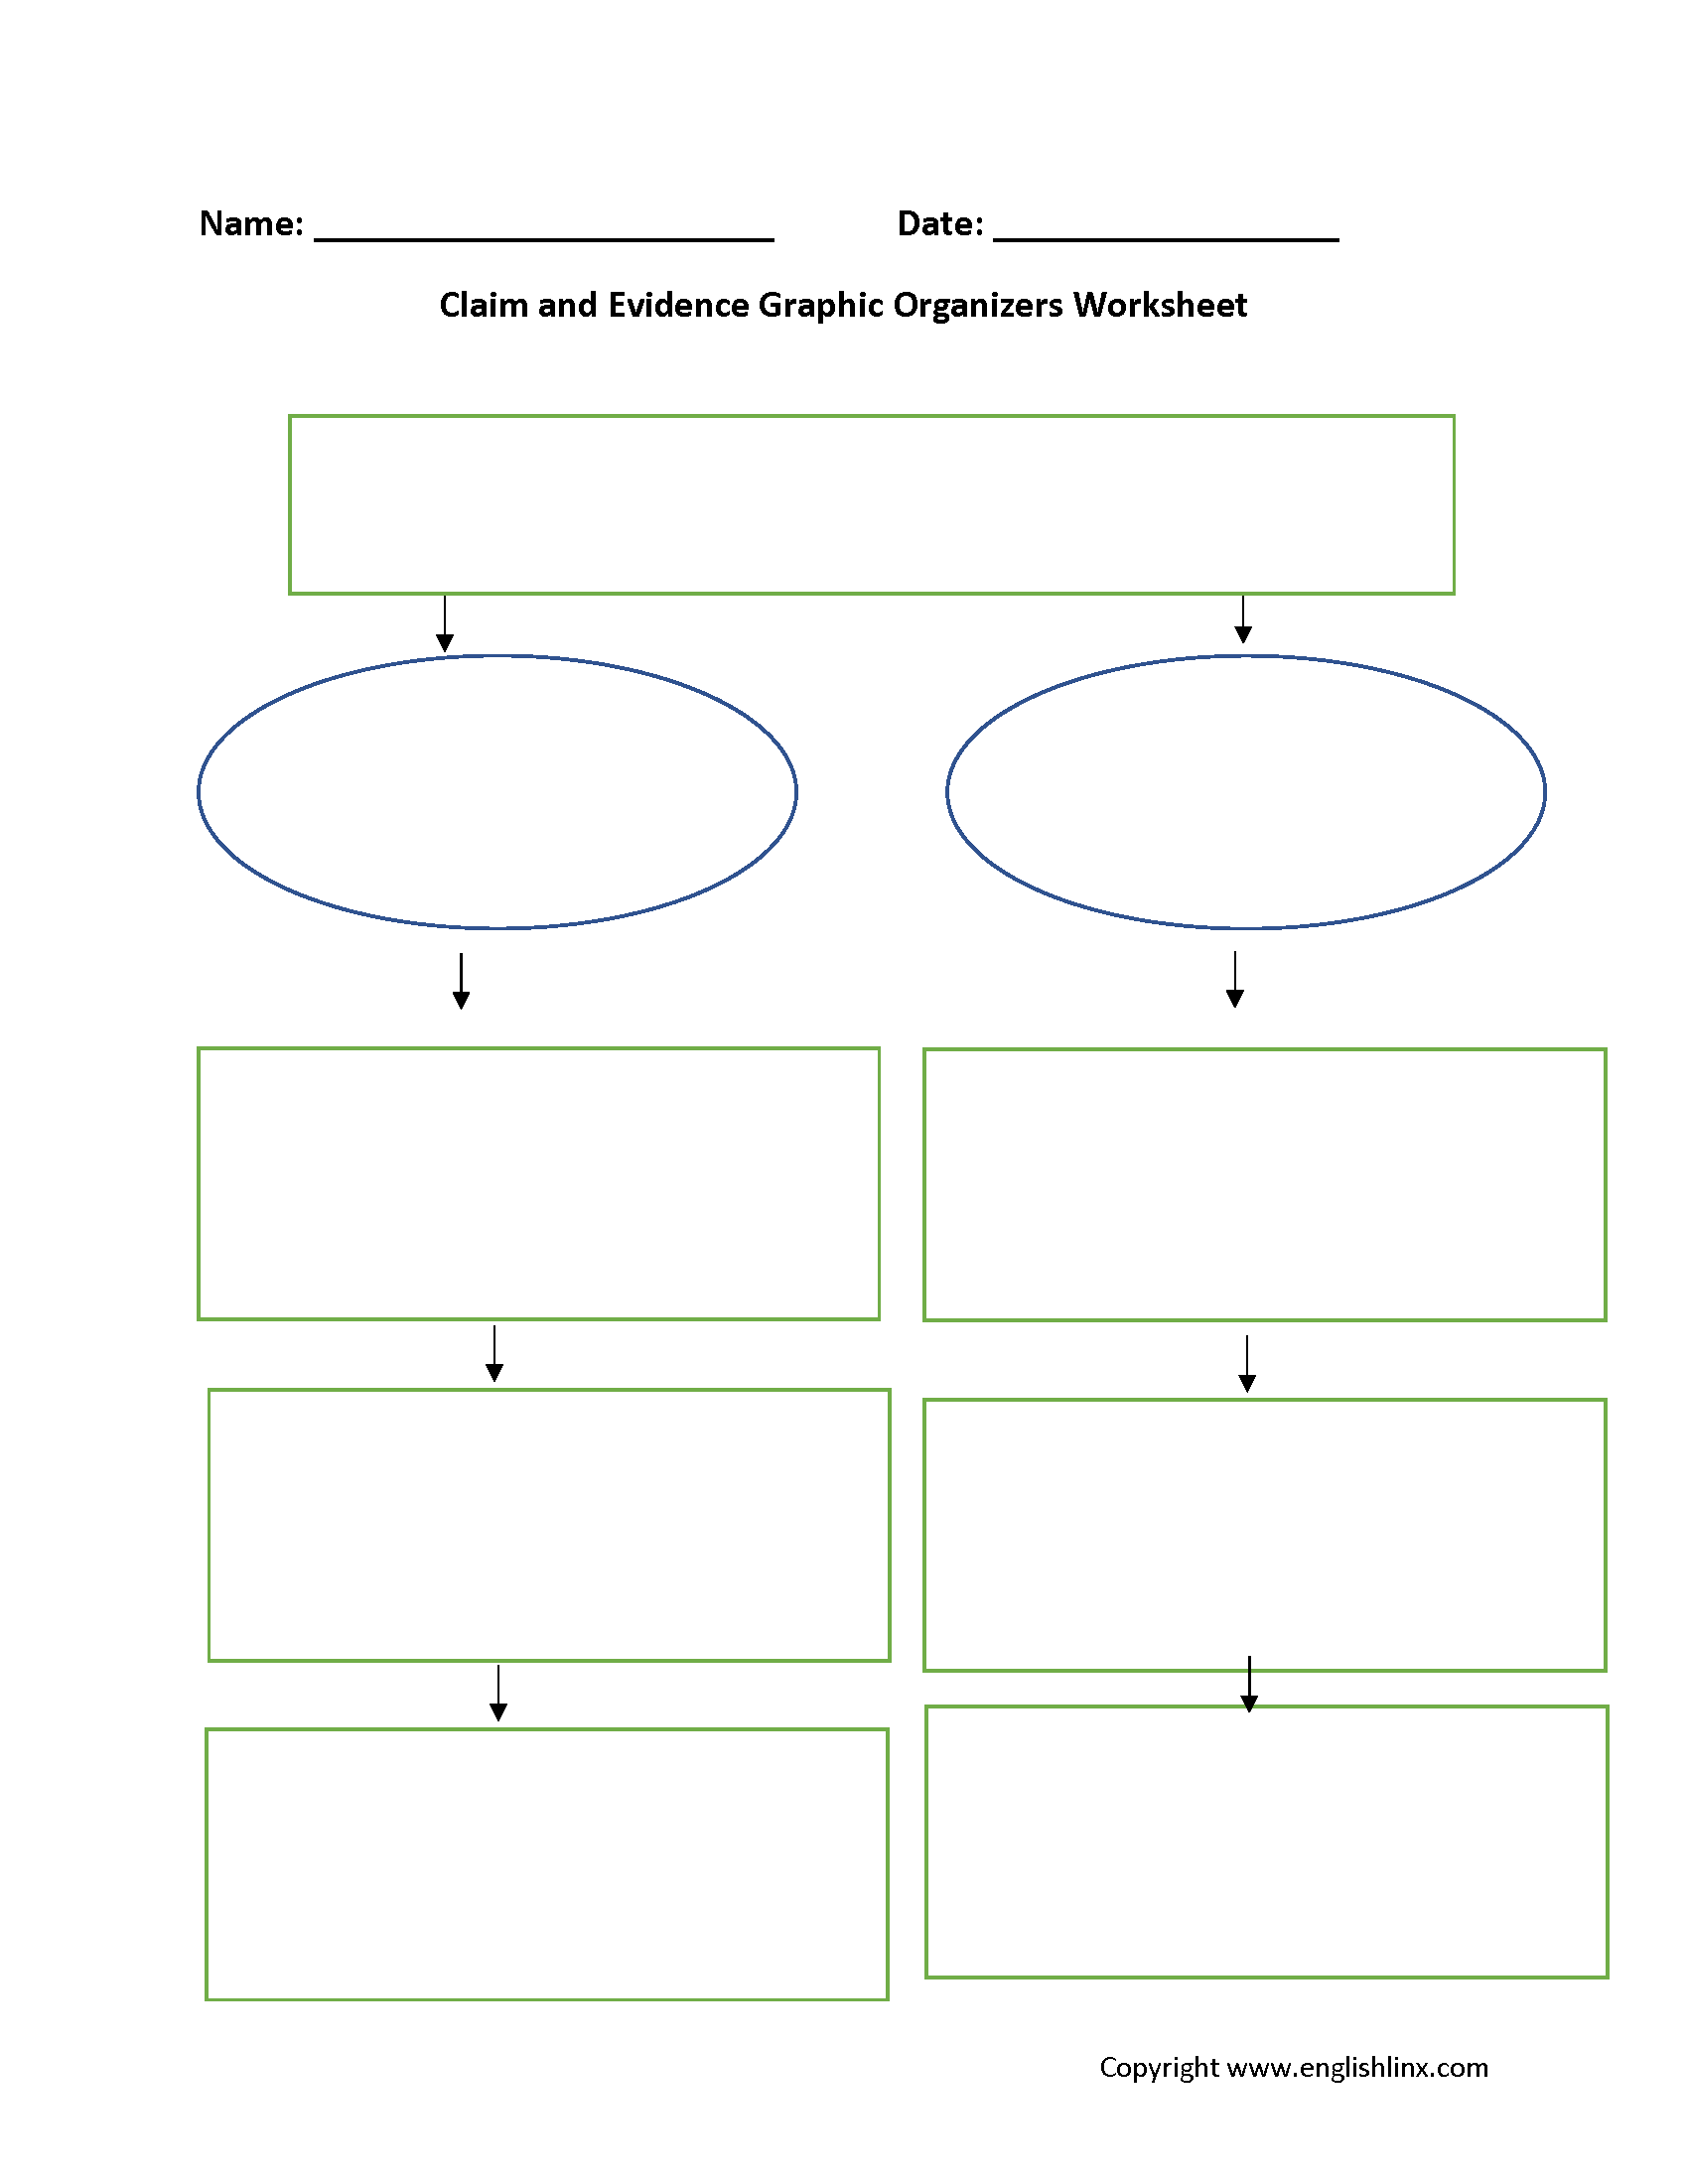 Claim and Evidence Graphic Organizers Worksheets